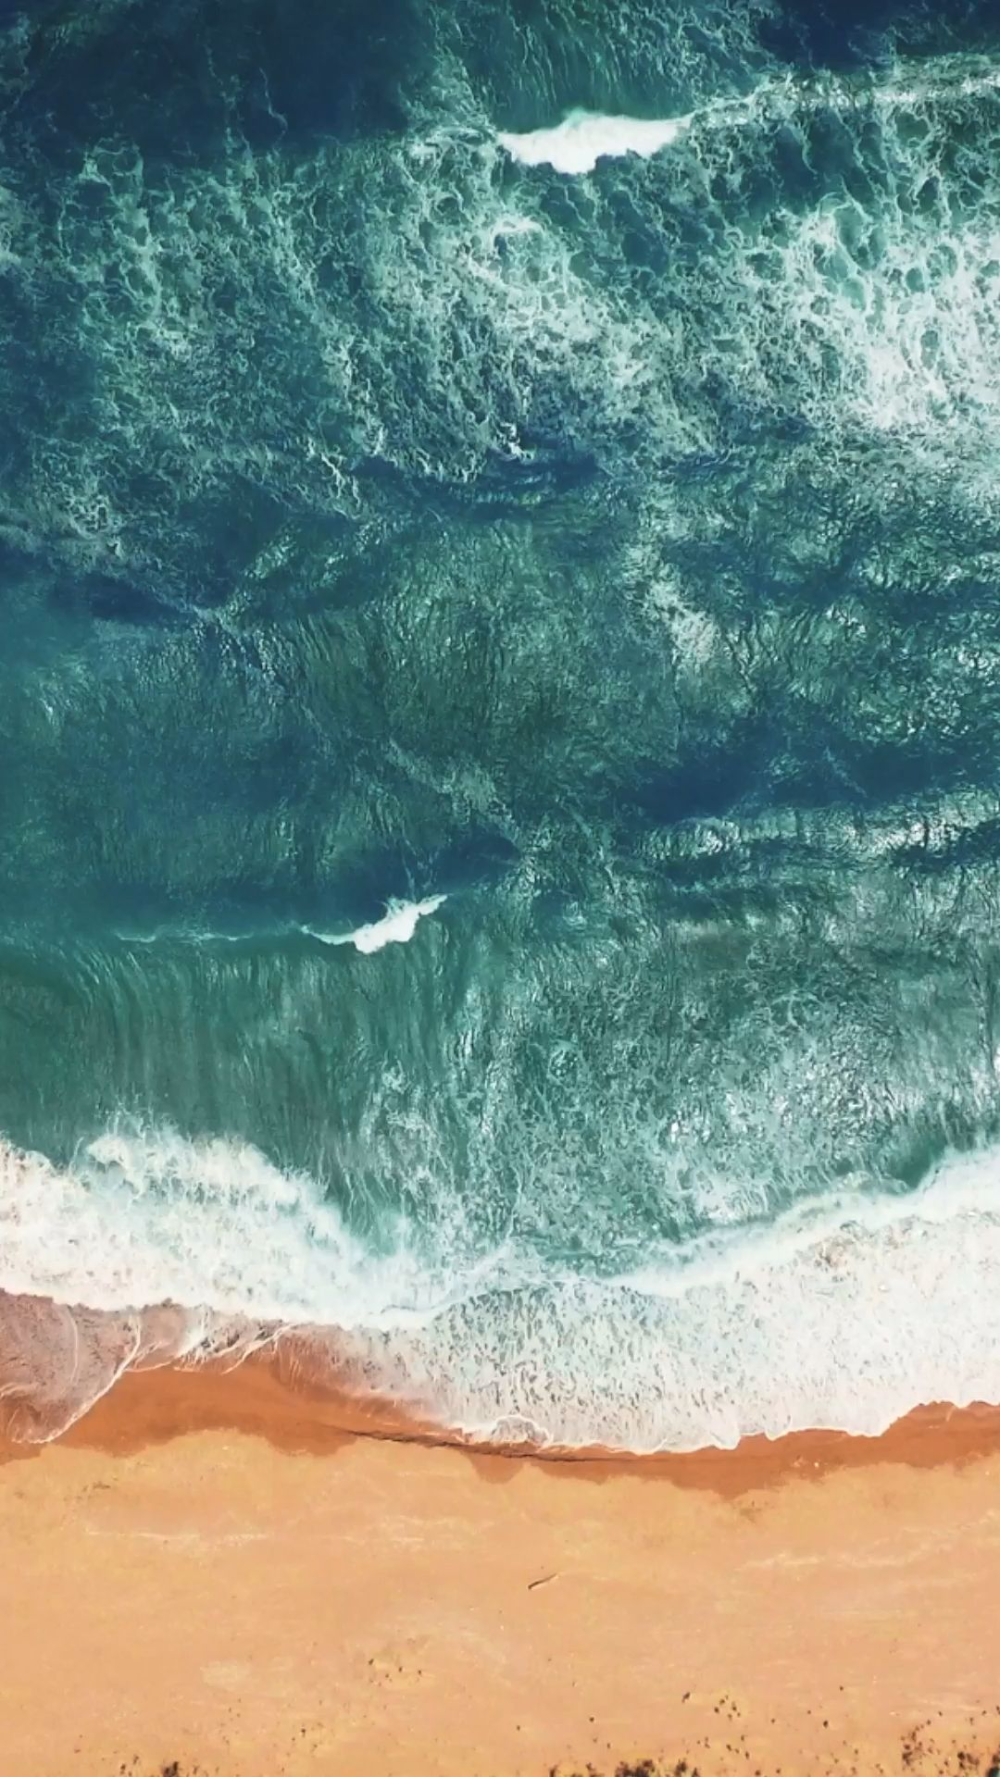 Live wallpaper for your iPhone XS from Everpix Live #ocean #wallpaper #livewallpaper Source. Waves wallpaper, Ocean wallpaper, Live wallpaper iphone